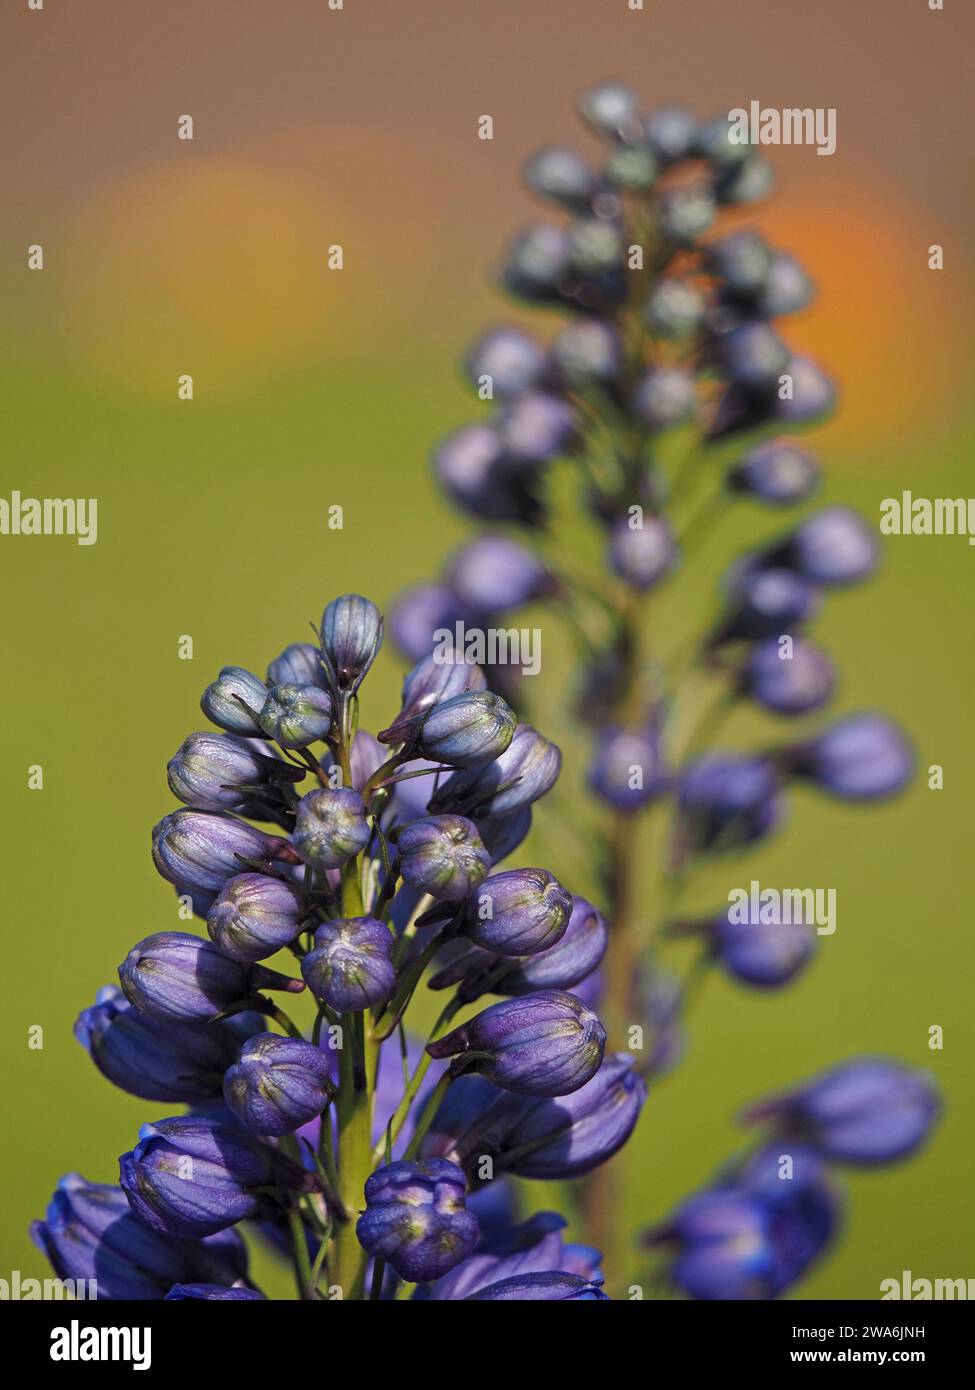 artistic differential focus image of cultivated Dark Blue & White Bee Delphinium buds - out of focus repetition in soft pastel green orange background Stock Photo